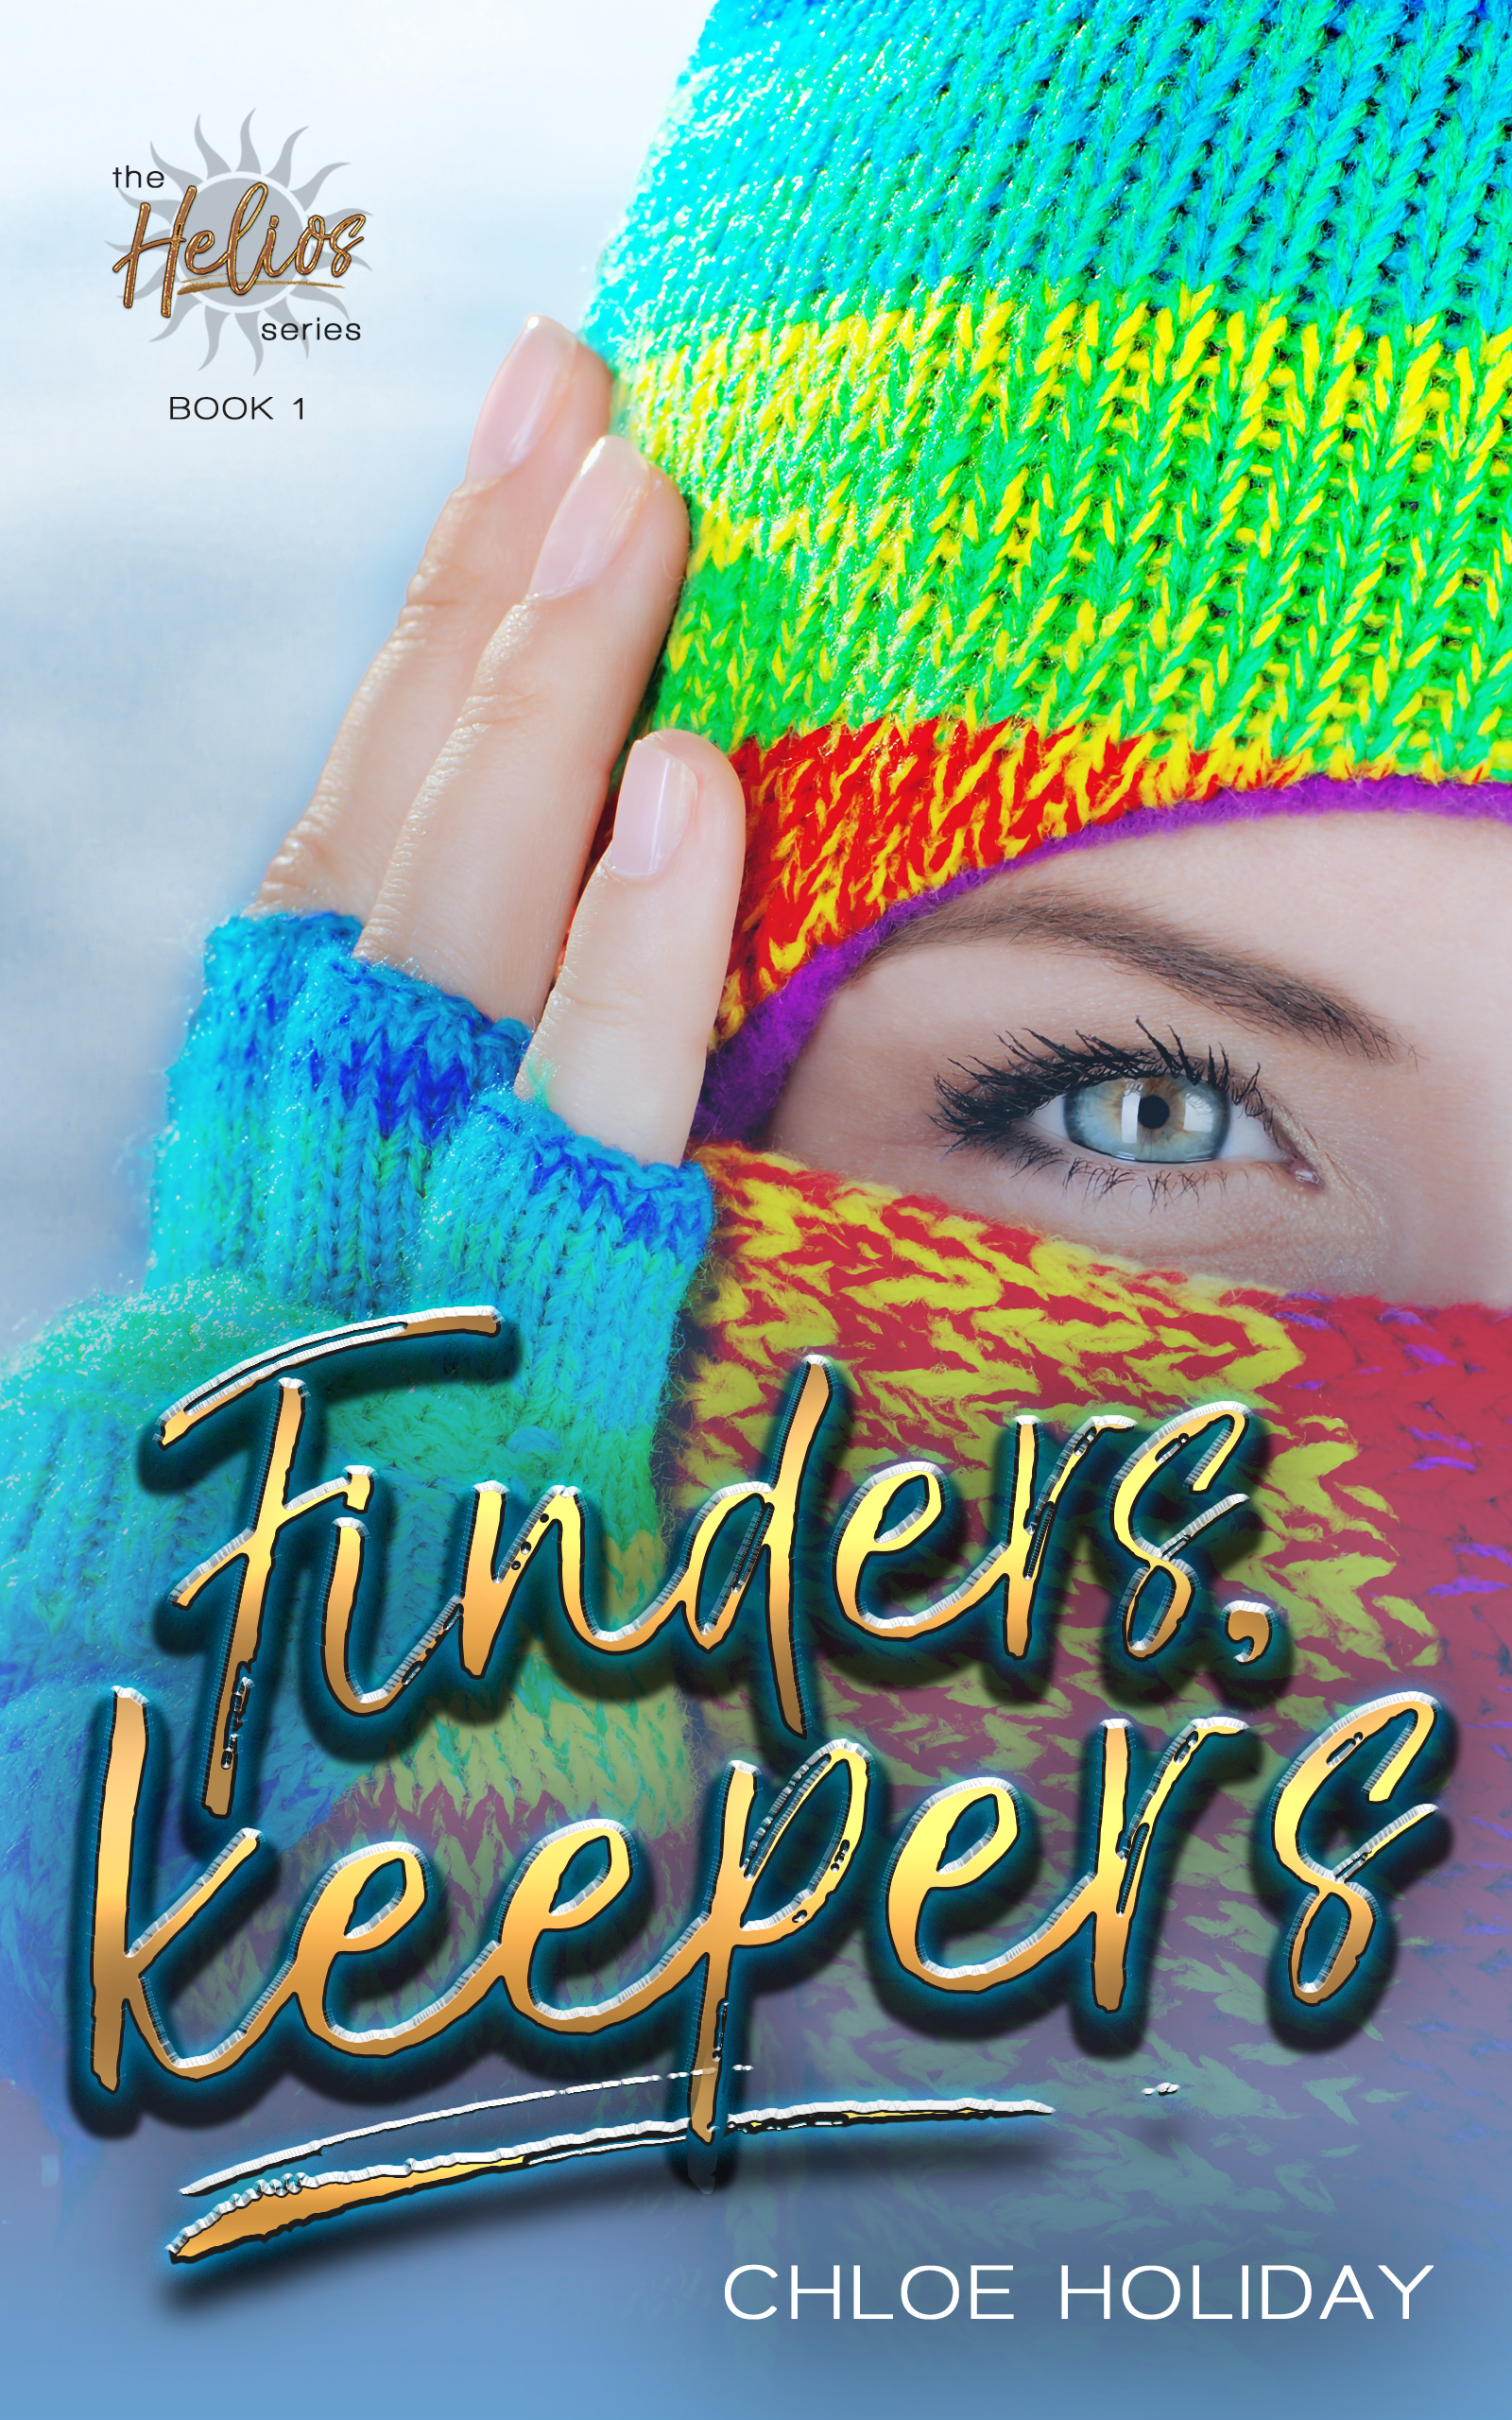 Finders, Keepers by Chloe Holiday has a new cover!